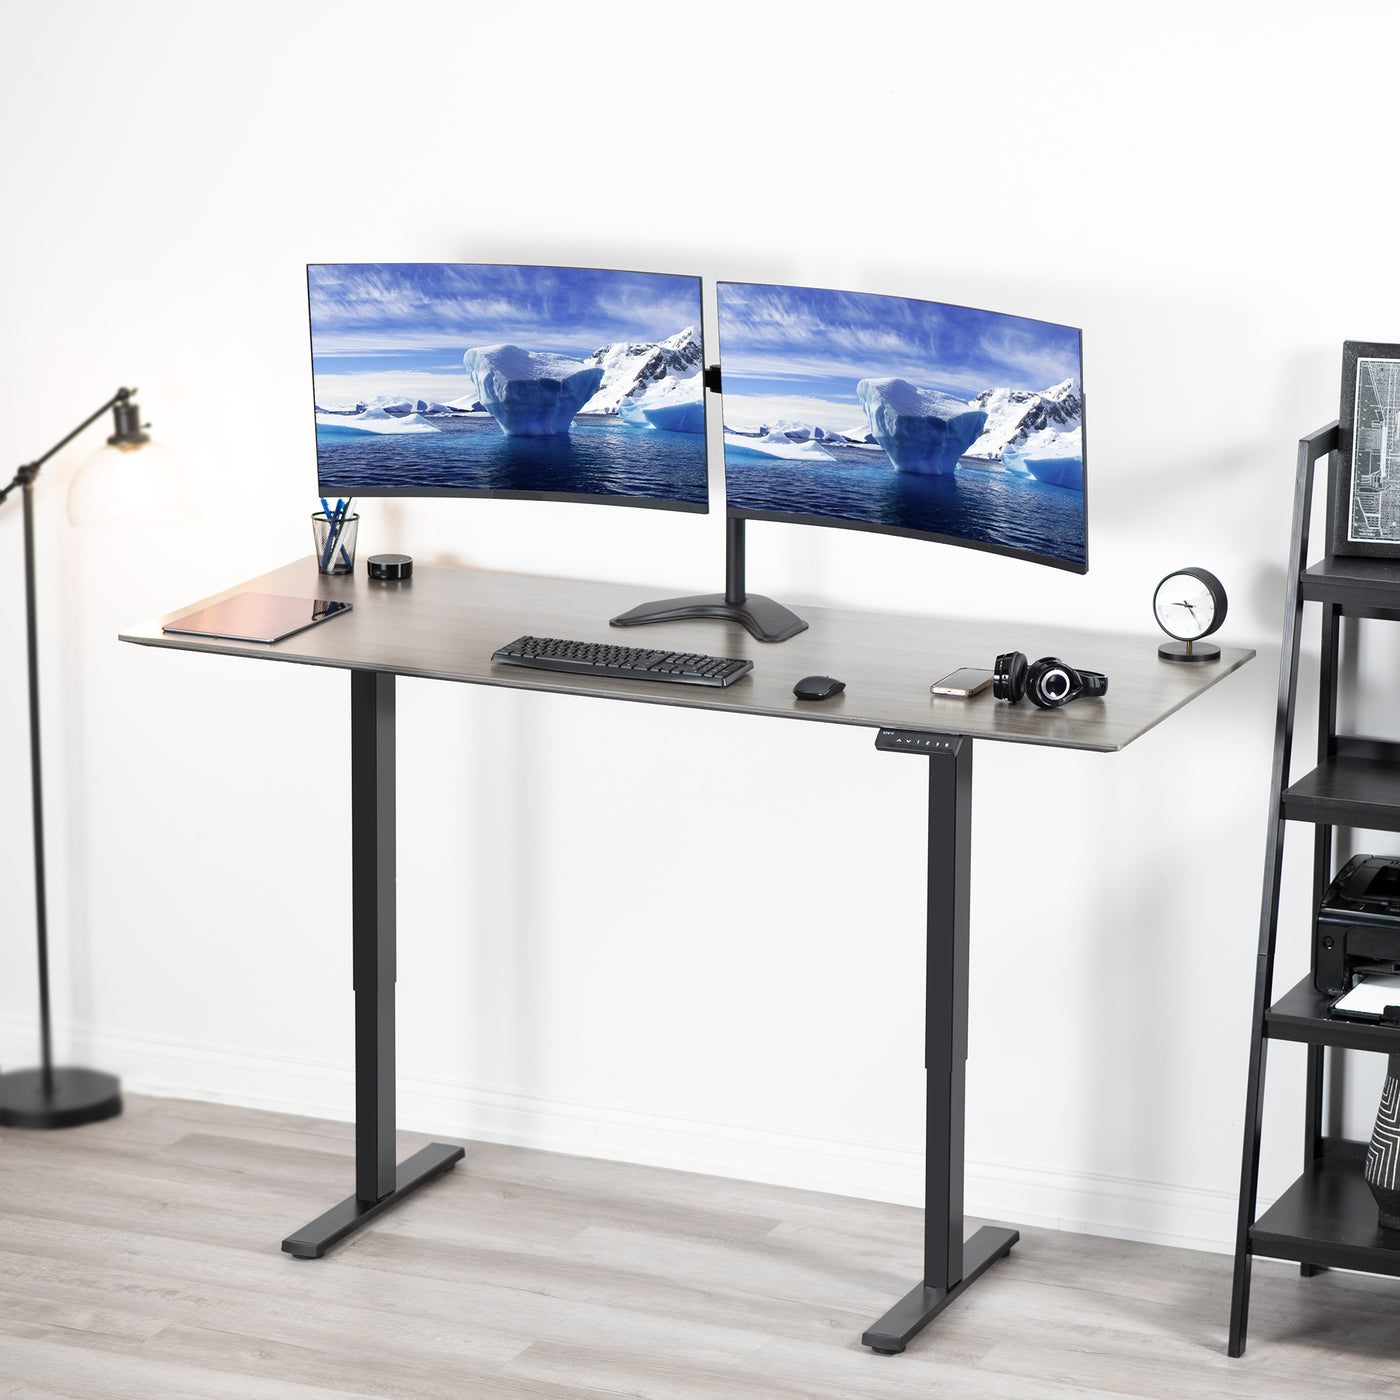 Modern sit to stand office seek with a dual monitor mount stand.